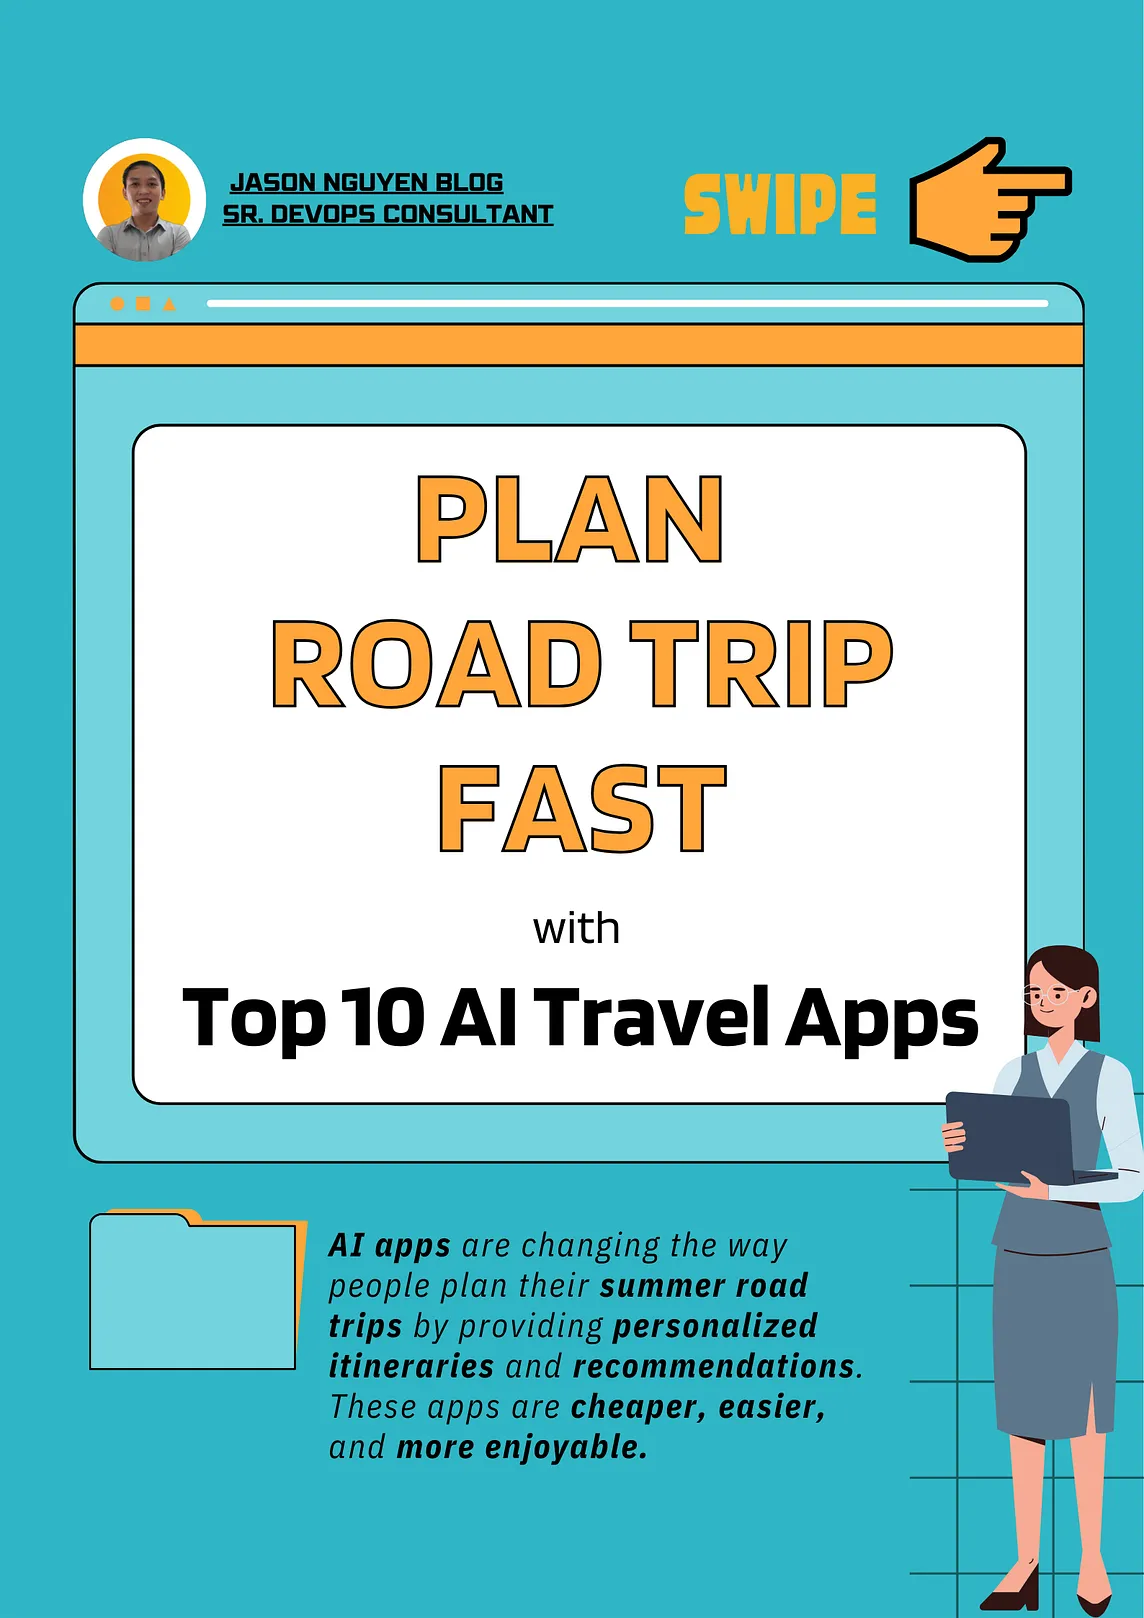 How to Plan an Easy Summer Road Trip with Top 10 AI Travel Apps ✈️